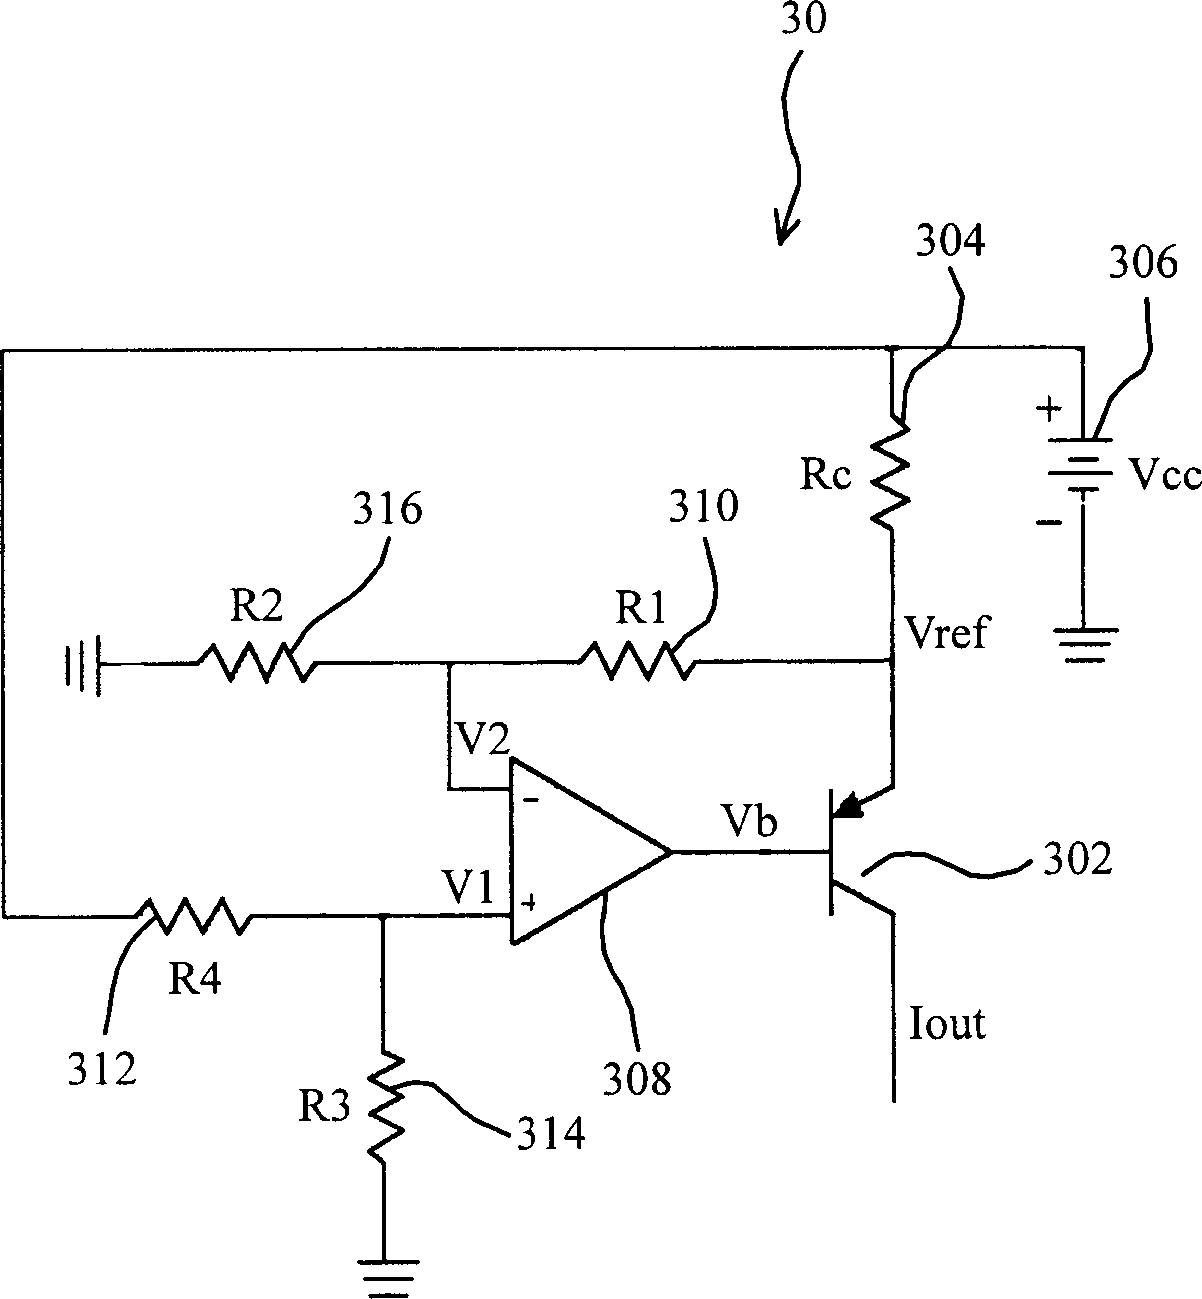 Circuit of constant current source